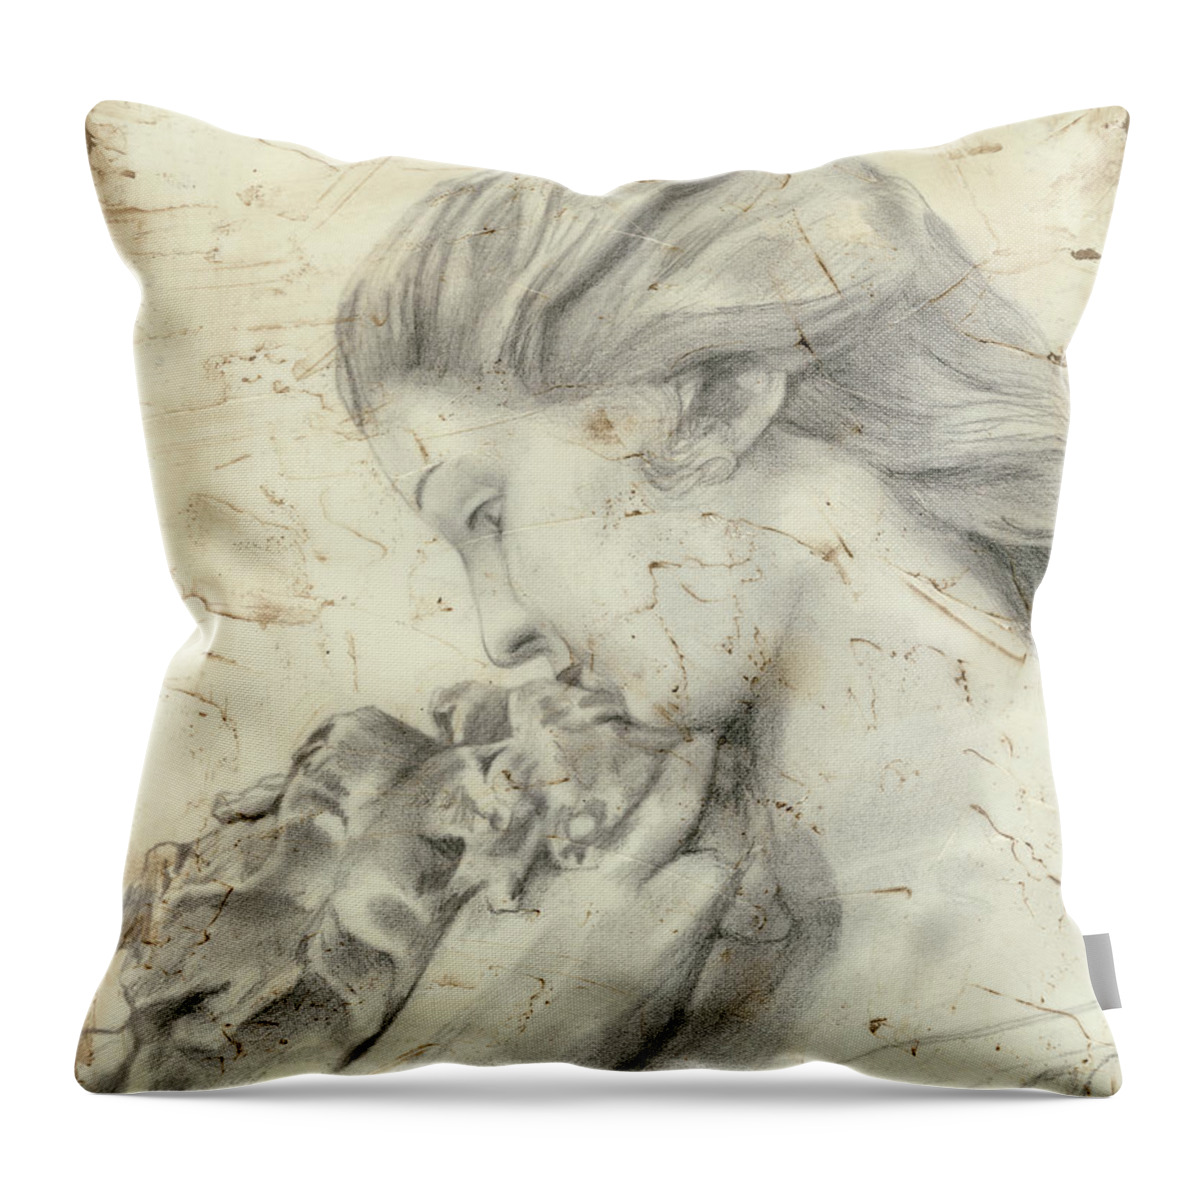 Figurative Throw Pillow featuring the painting Statue In The Garden II by Megan Meagher